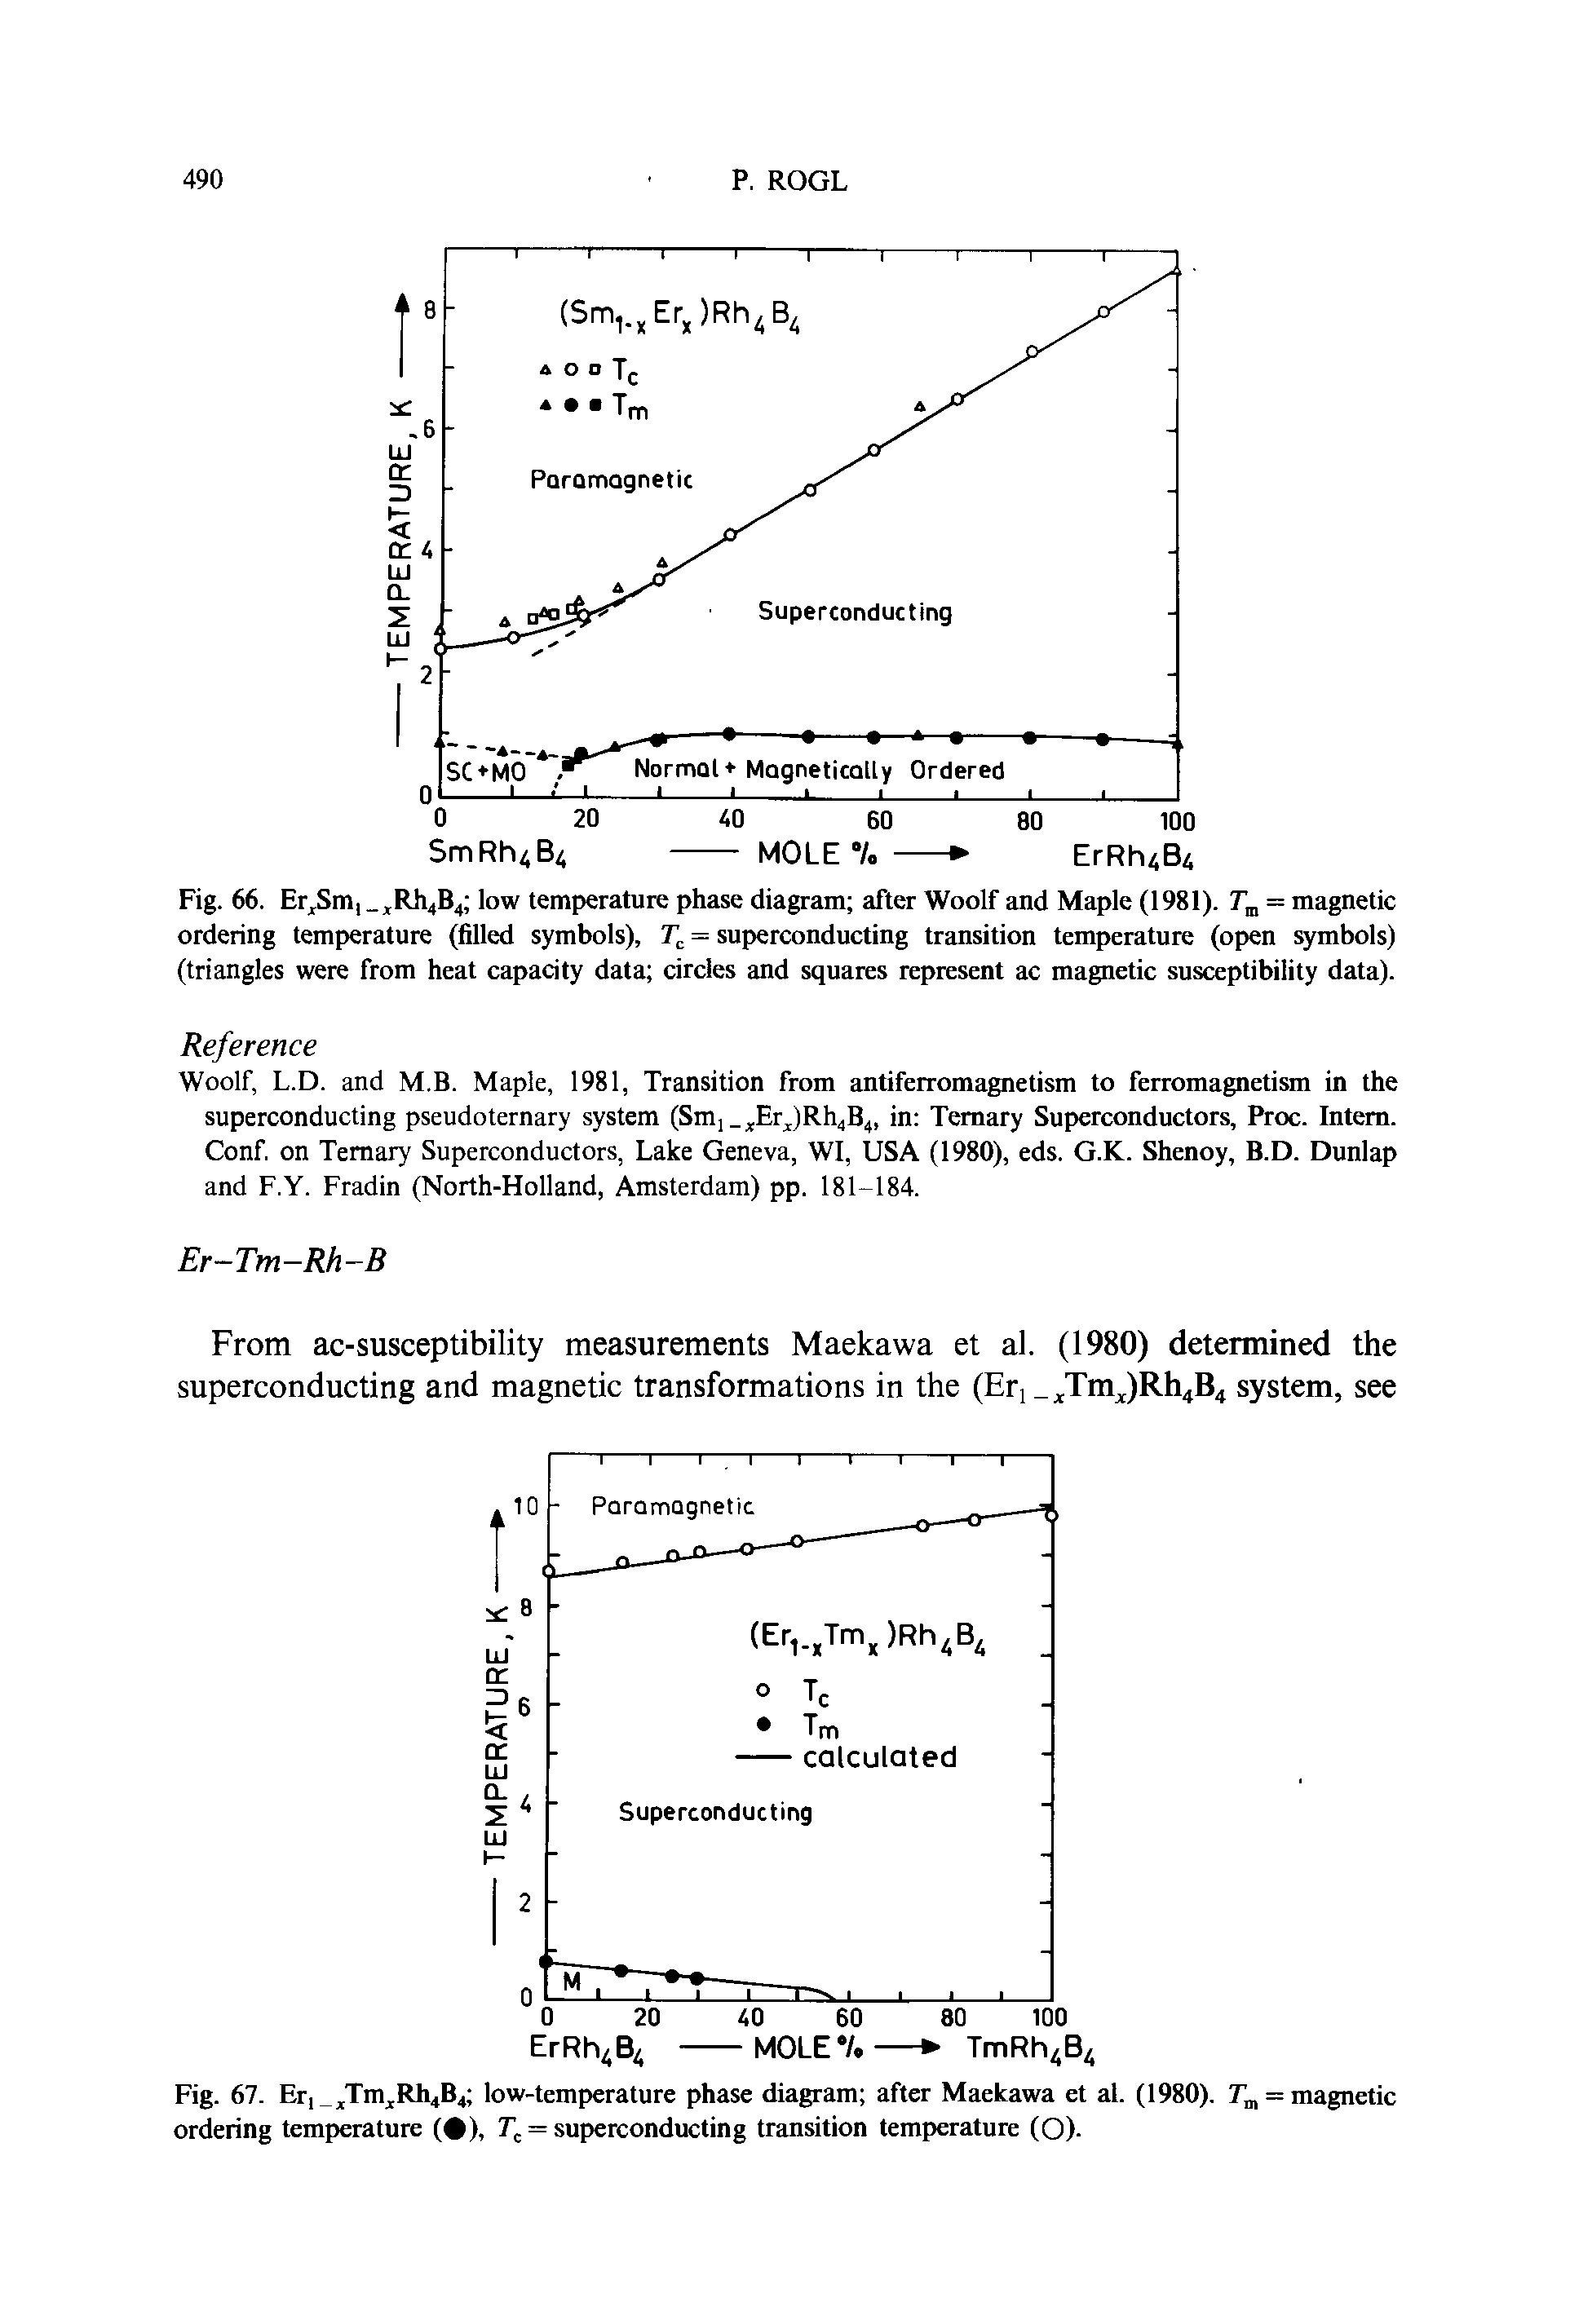 Fig. 66. Er,Sni, Rh4B4 low temperature phase diagram after Woolf and Maple (1981). T = magnetic ordering temperature (filled symbols), = superconducting transition temperature (open symbols) (triangles were from heat capacity data circles and squares represent ac magnetic susceptibility data).